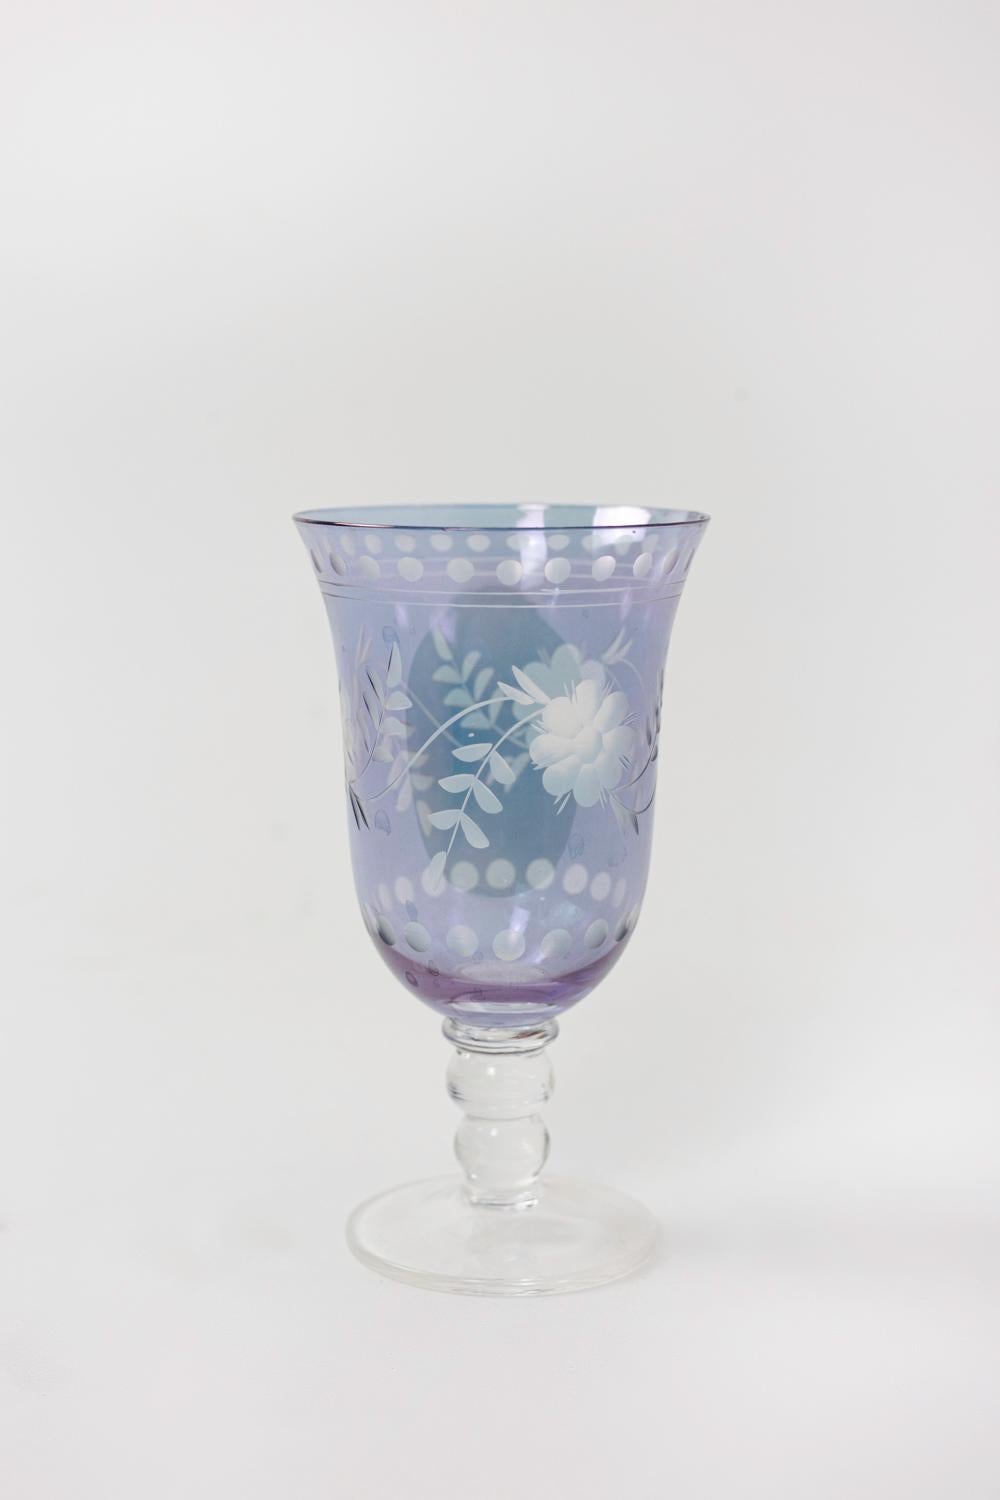 Bohemian crystal style glassware set, contemporary work For Sale 1